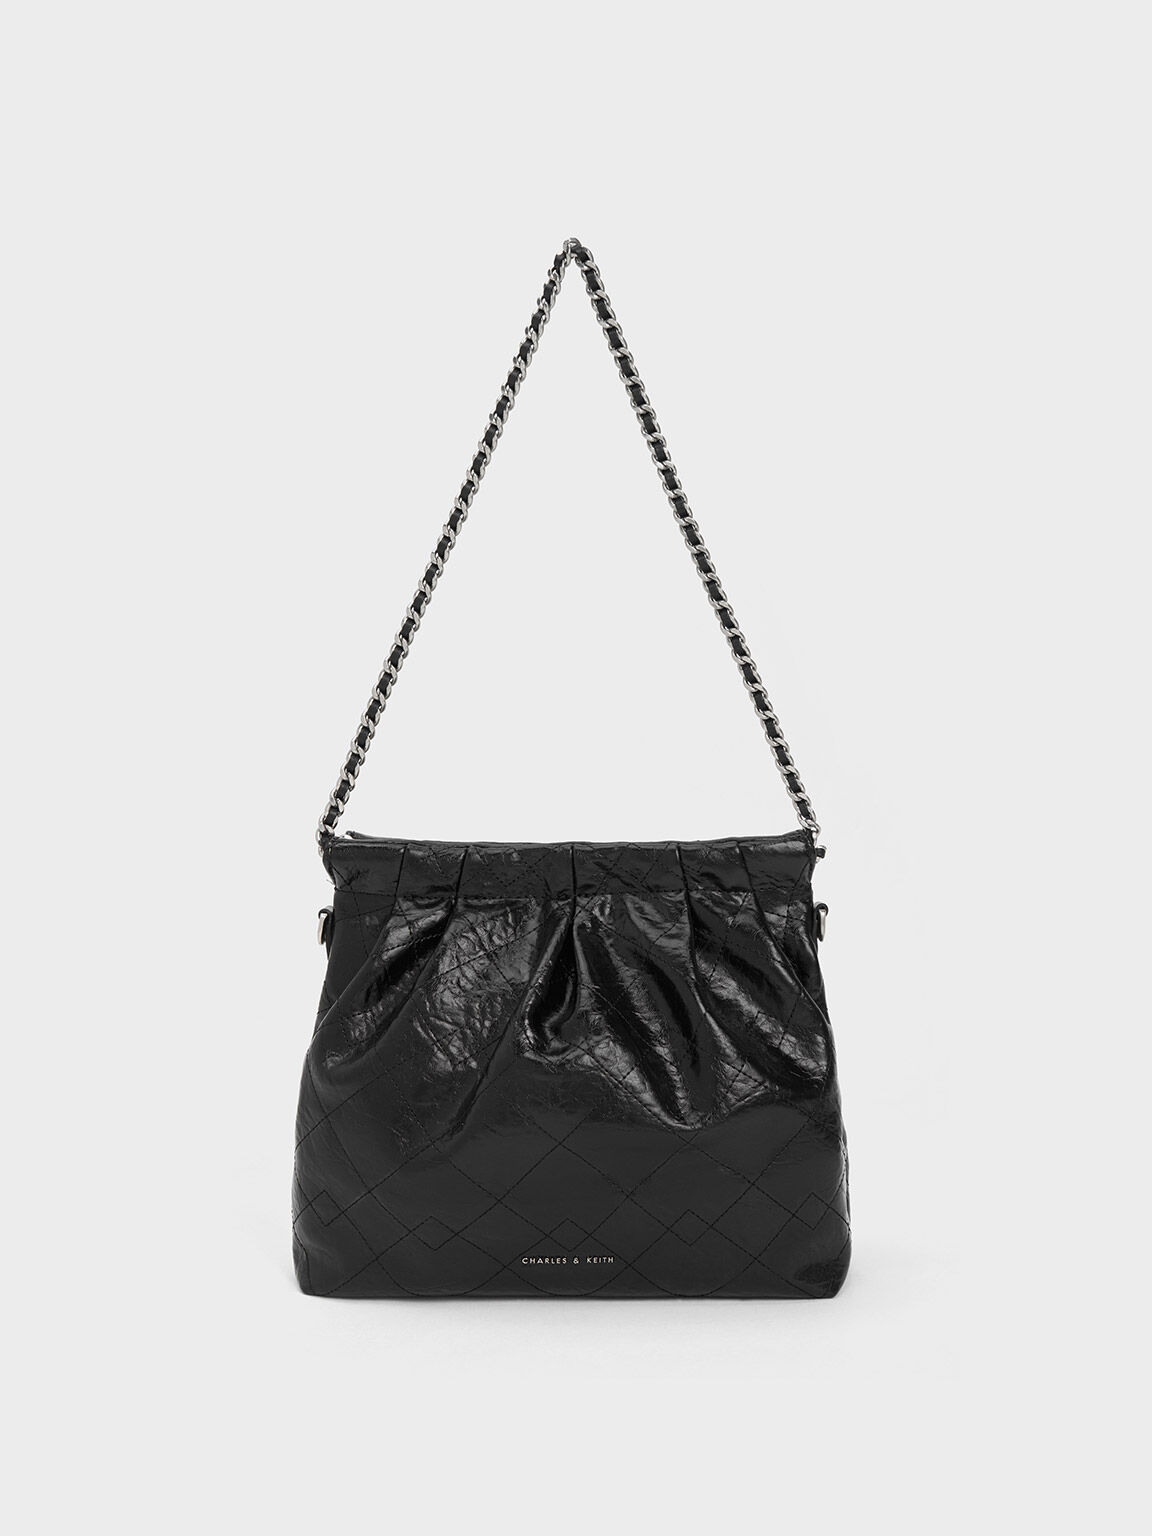 Charles and Keith Black, White Shoulder Bag PU Leather Black